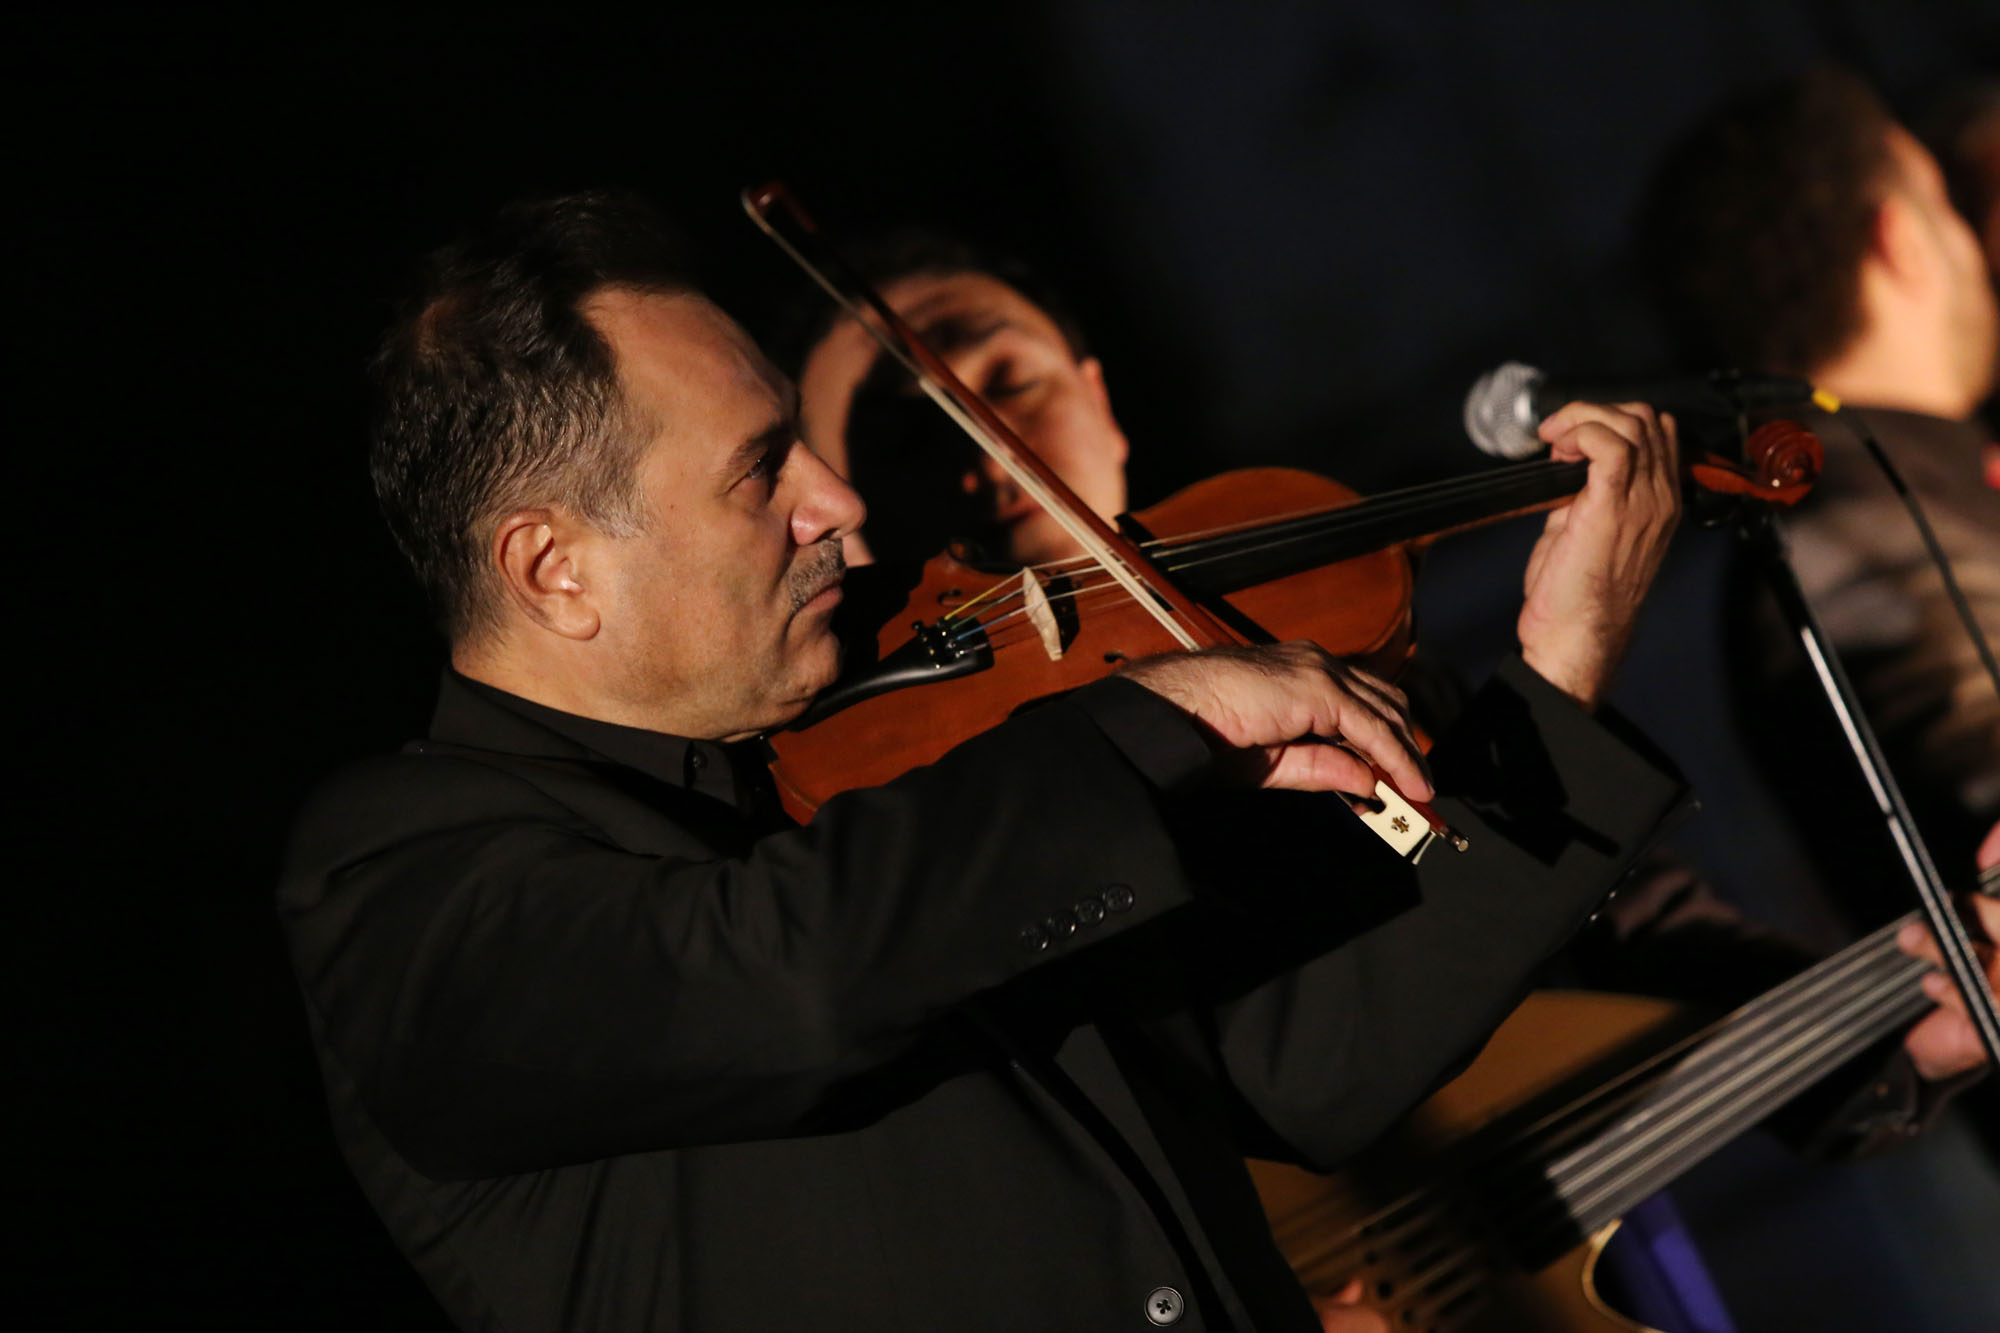  A violinist plays traditional Syrian music at Photoville's Opening Night presentation by Newest Americans. (Photo by Anthony Alvarez) 